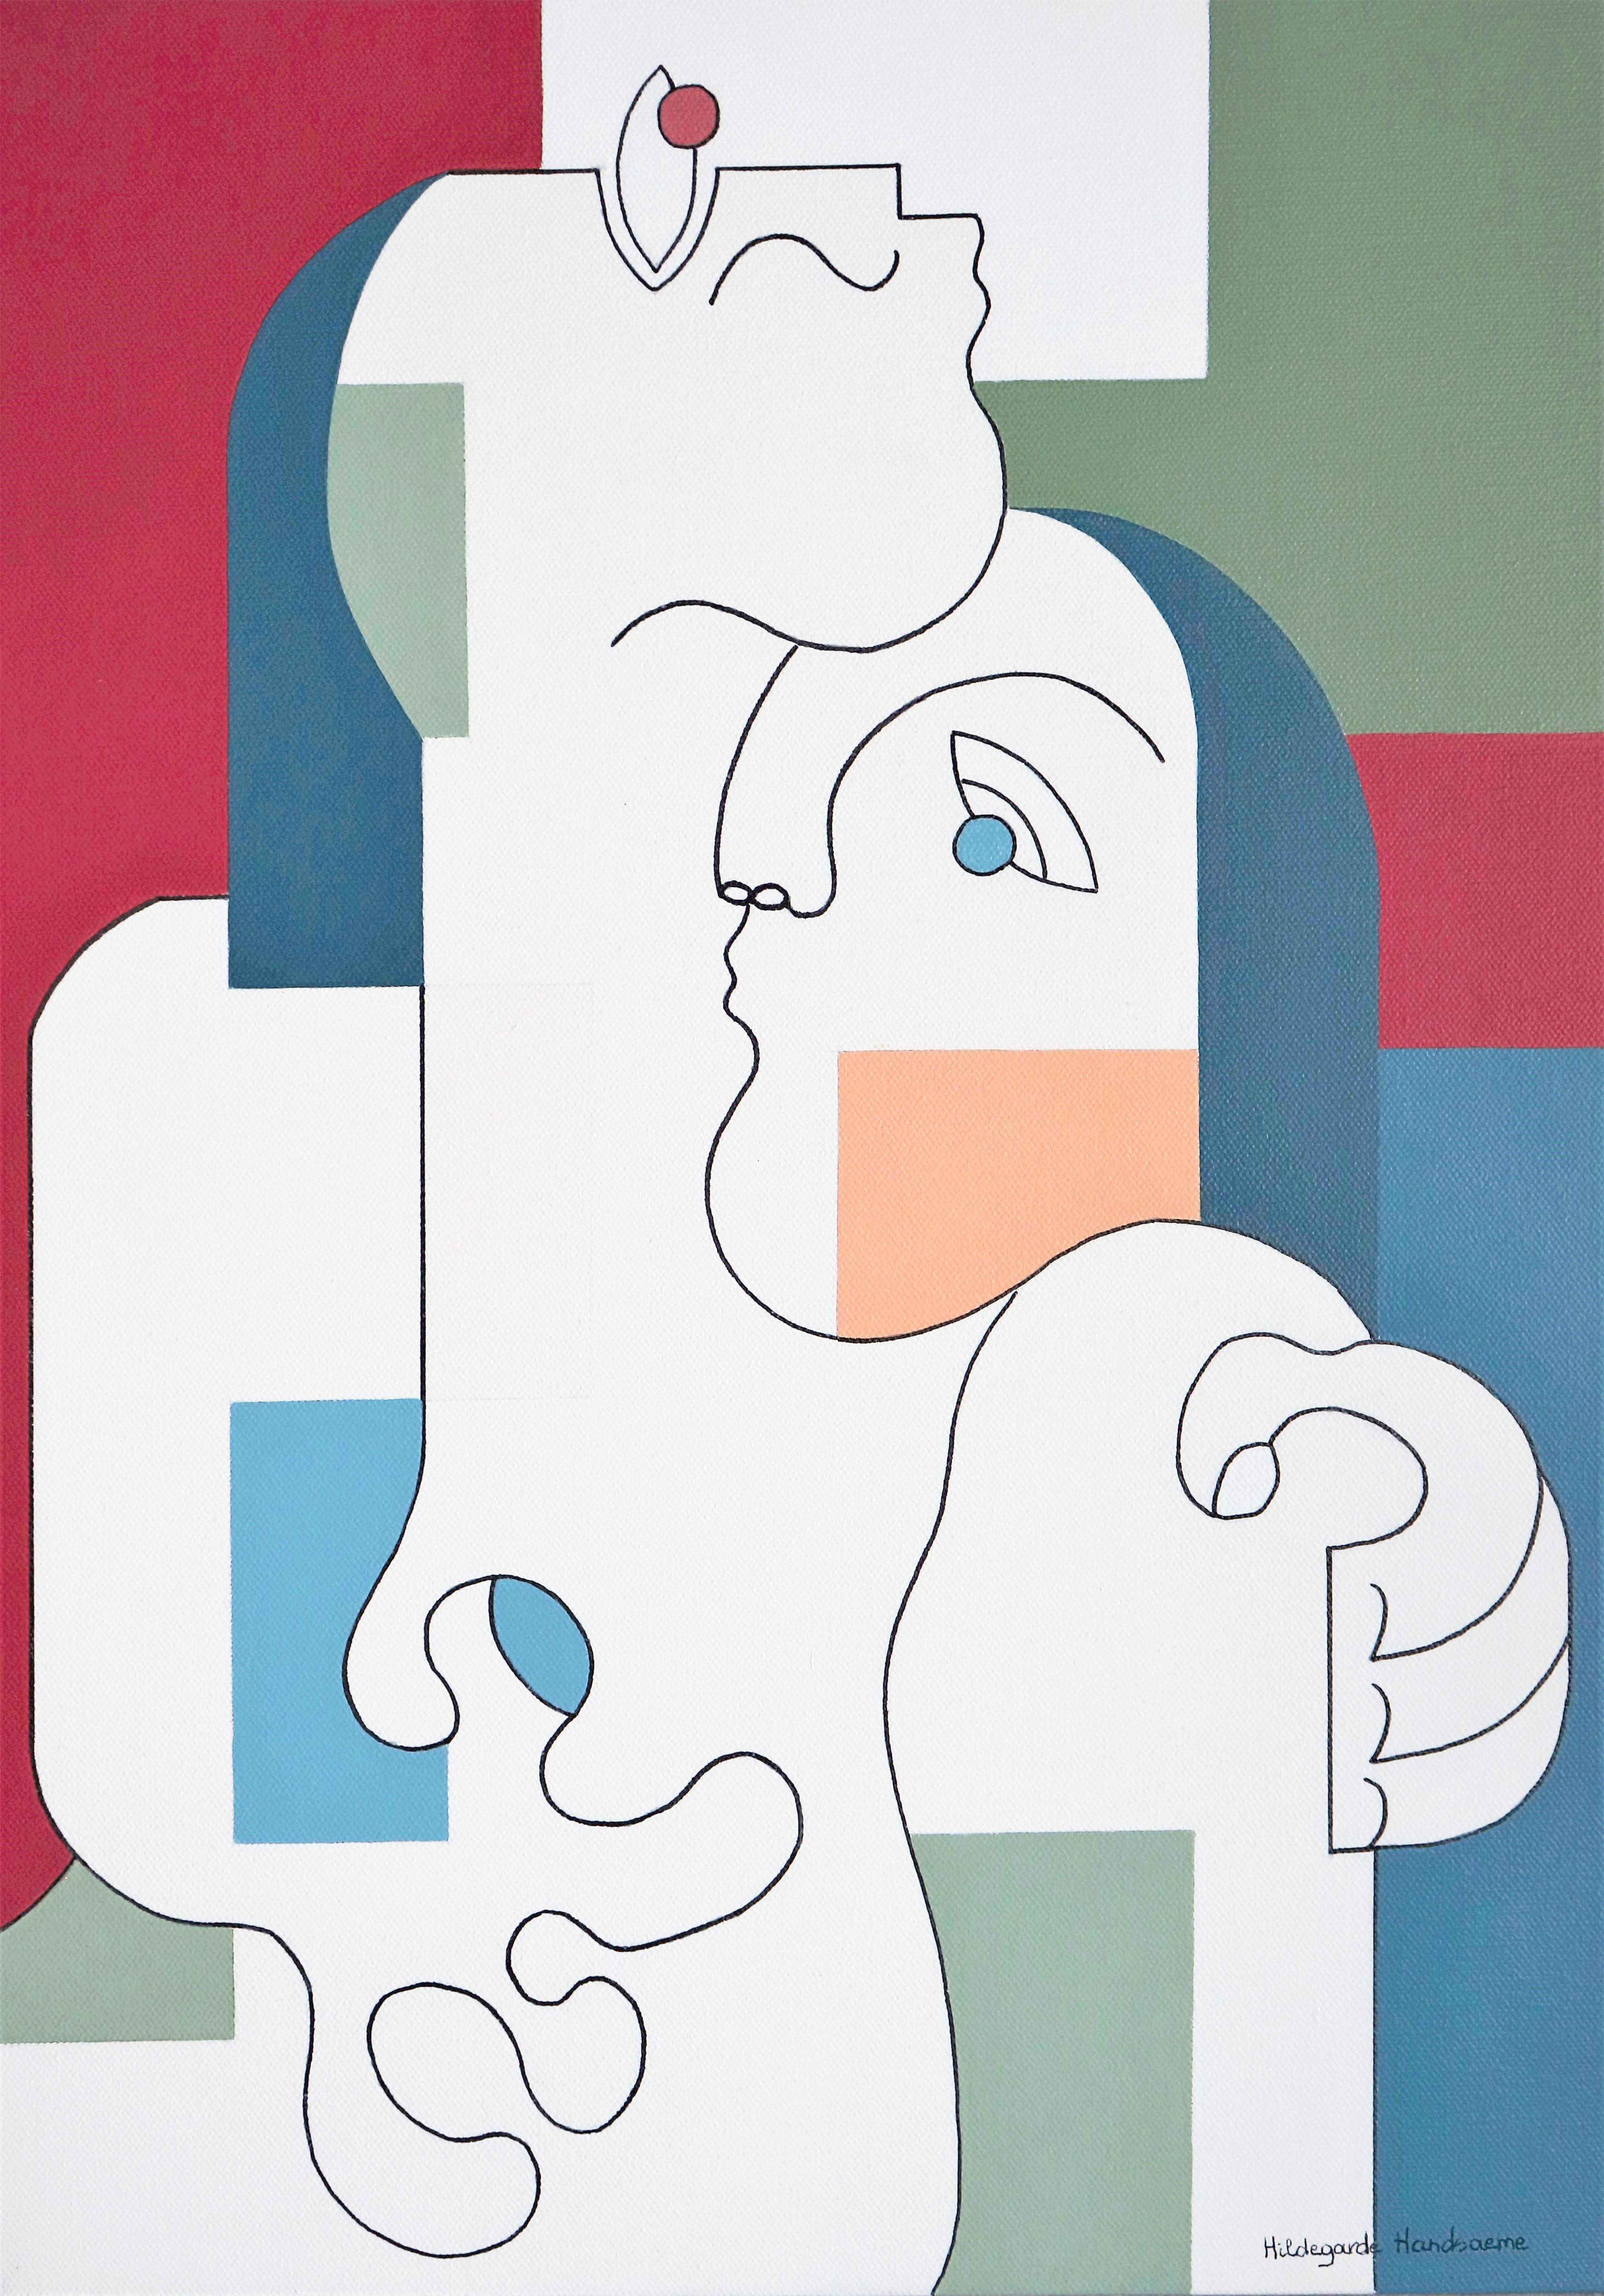 Hildegarde Handsaeme Abstract Painting - Tutum, Modern Abstract Geometric Painting Canvas Cubism Portrait Green Red Blue